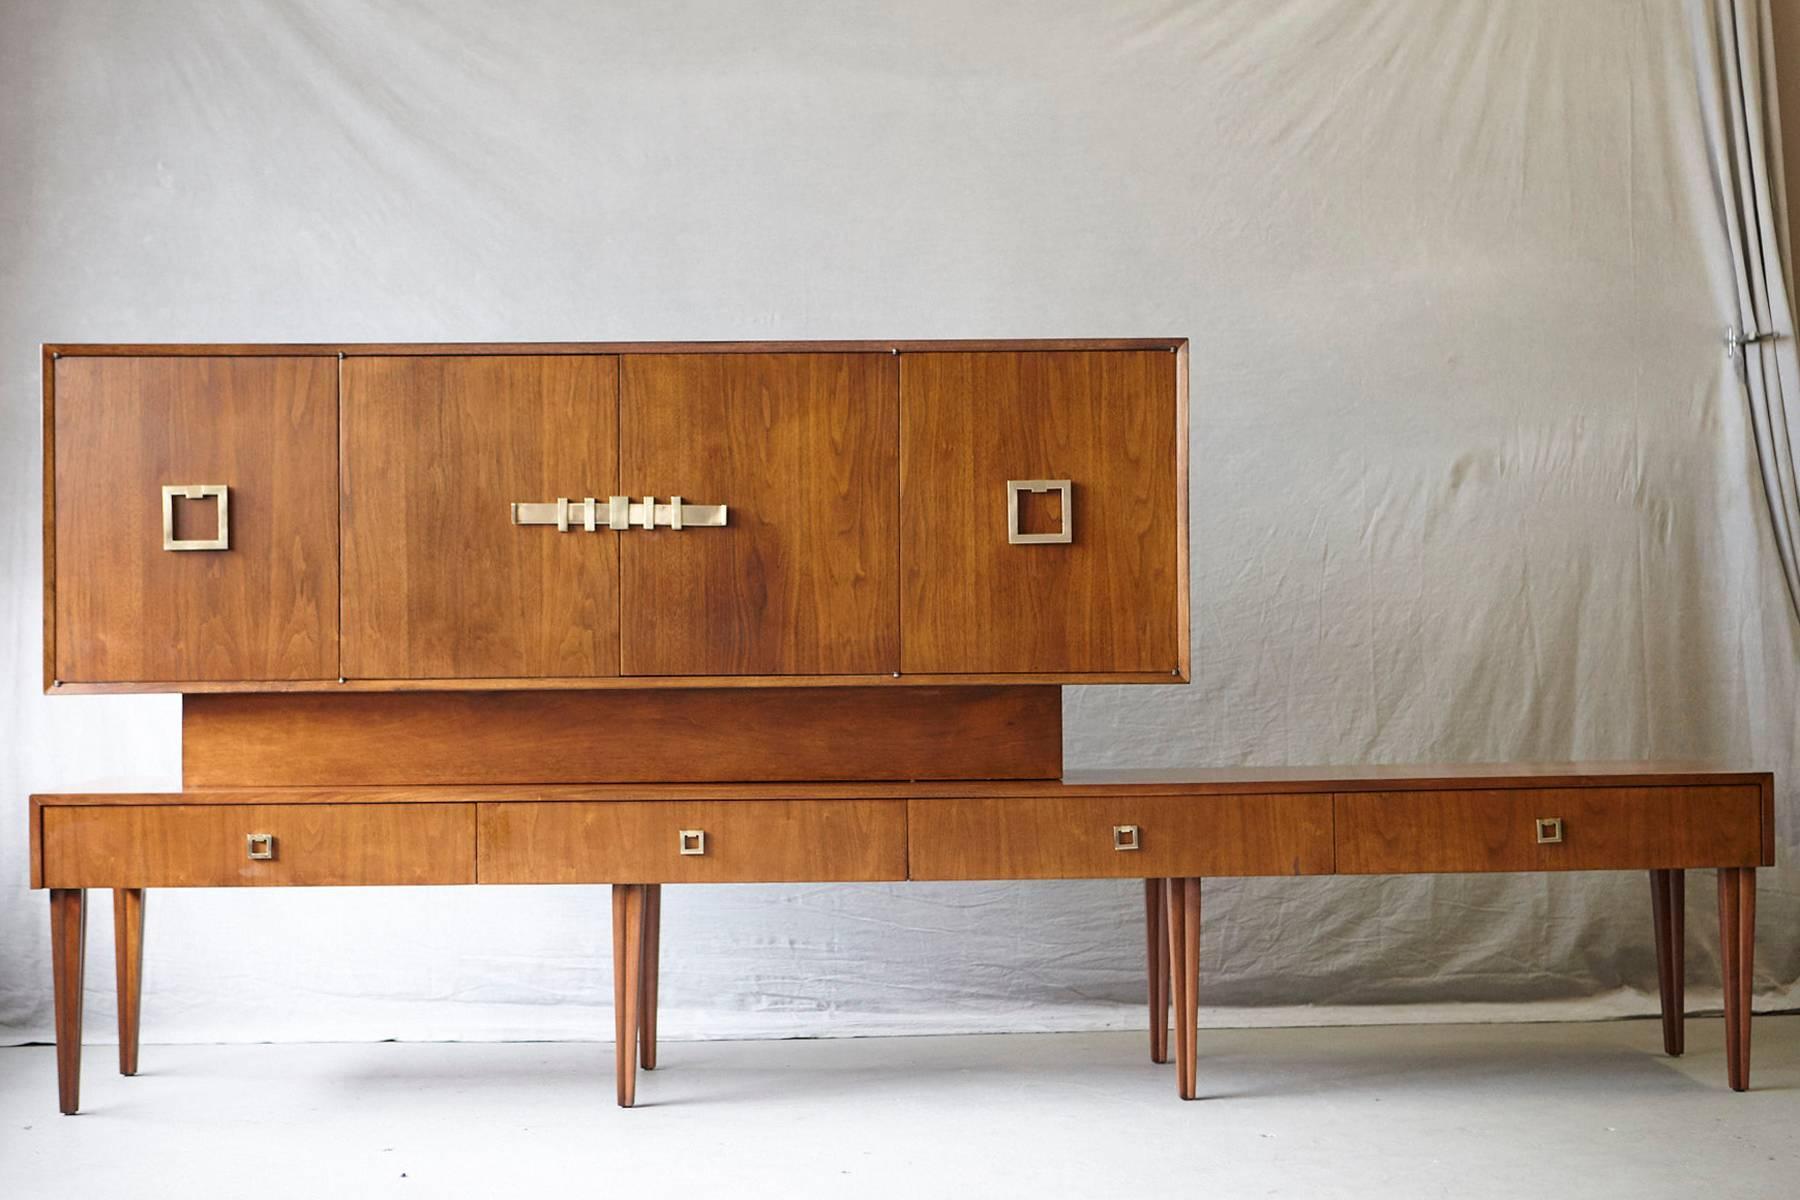 Exceptional long custom-made walnut sideboard or credenza on eight reeded and tapered legs, circa 1940s.
Base with four drawers, one silverware drawer with lined felt and felt cover and another drawer also lined with felt. The top has four doors,